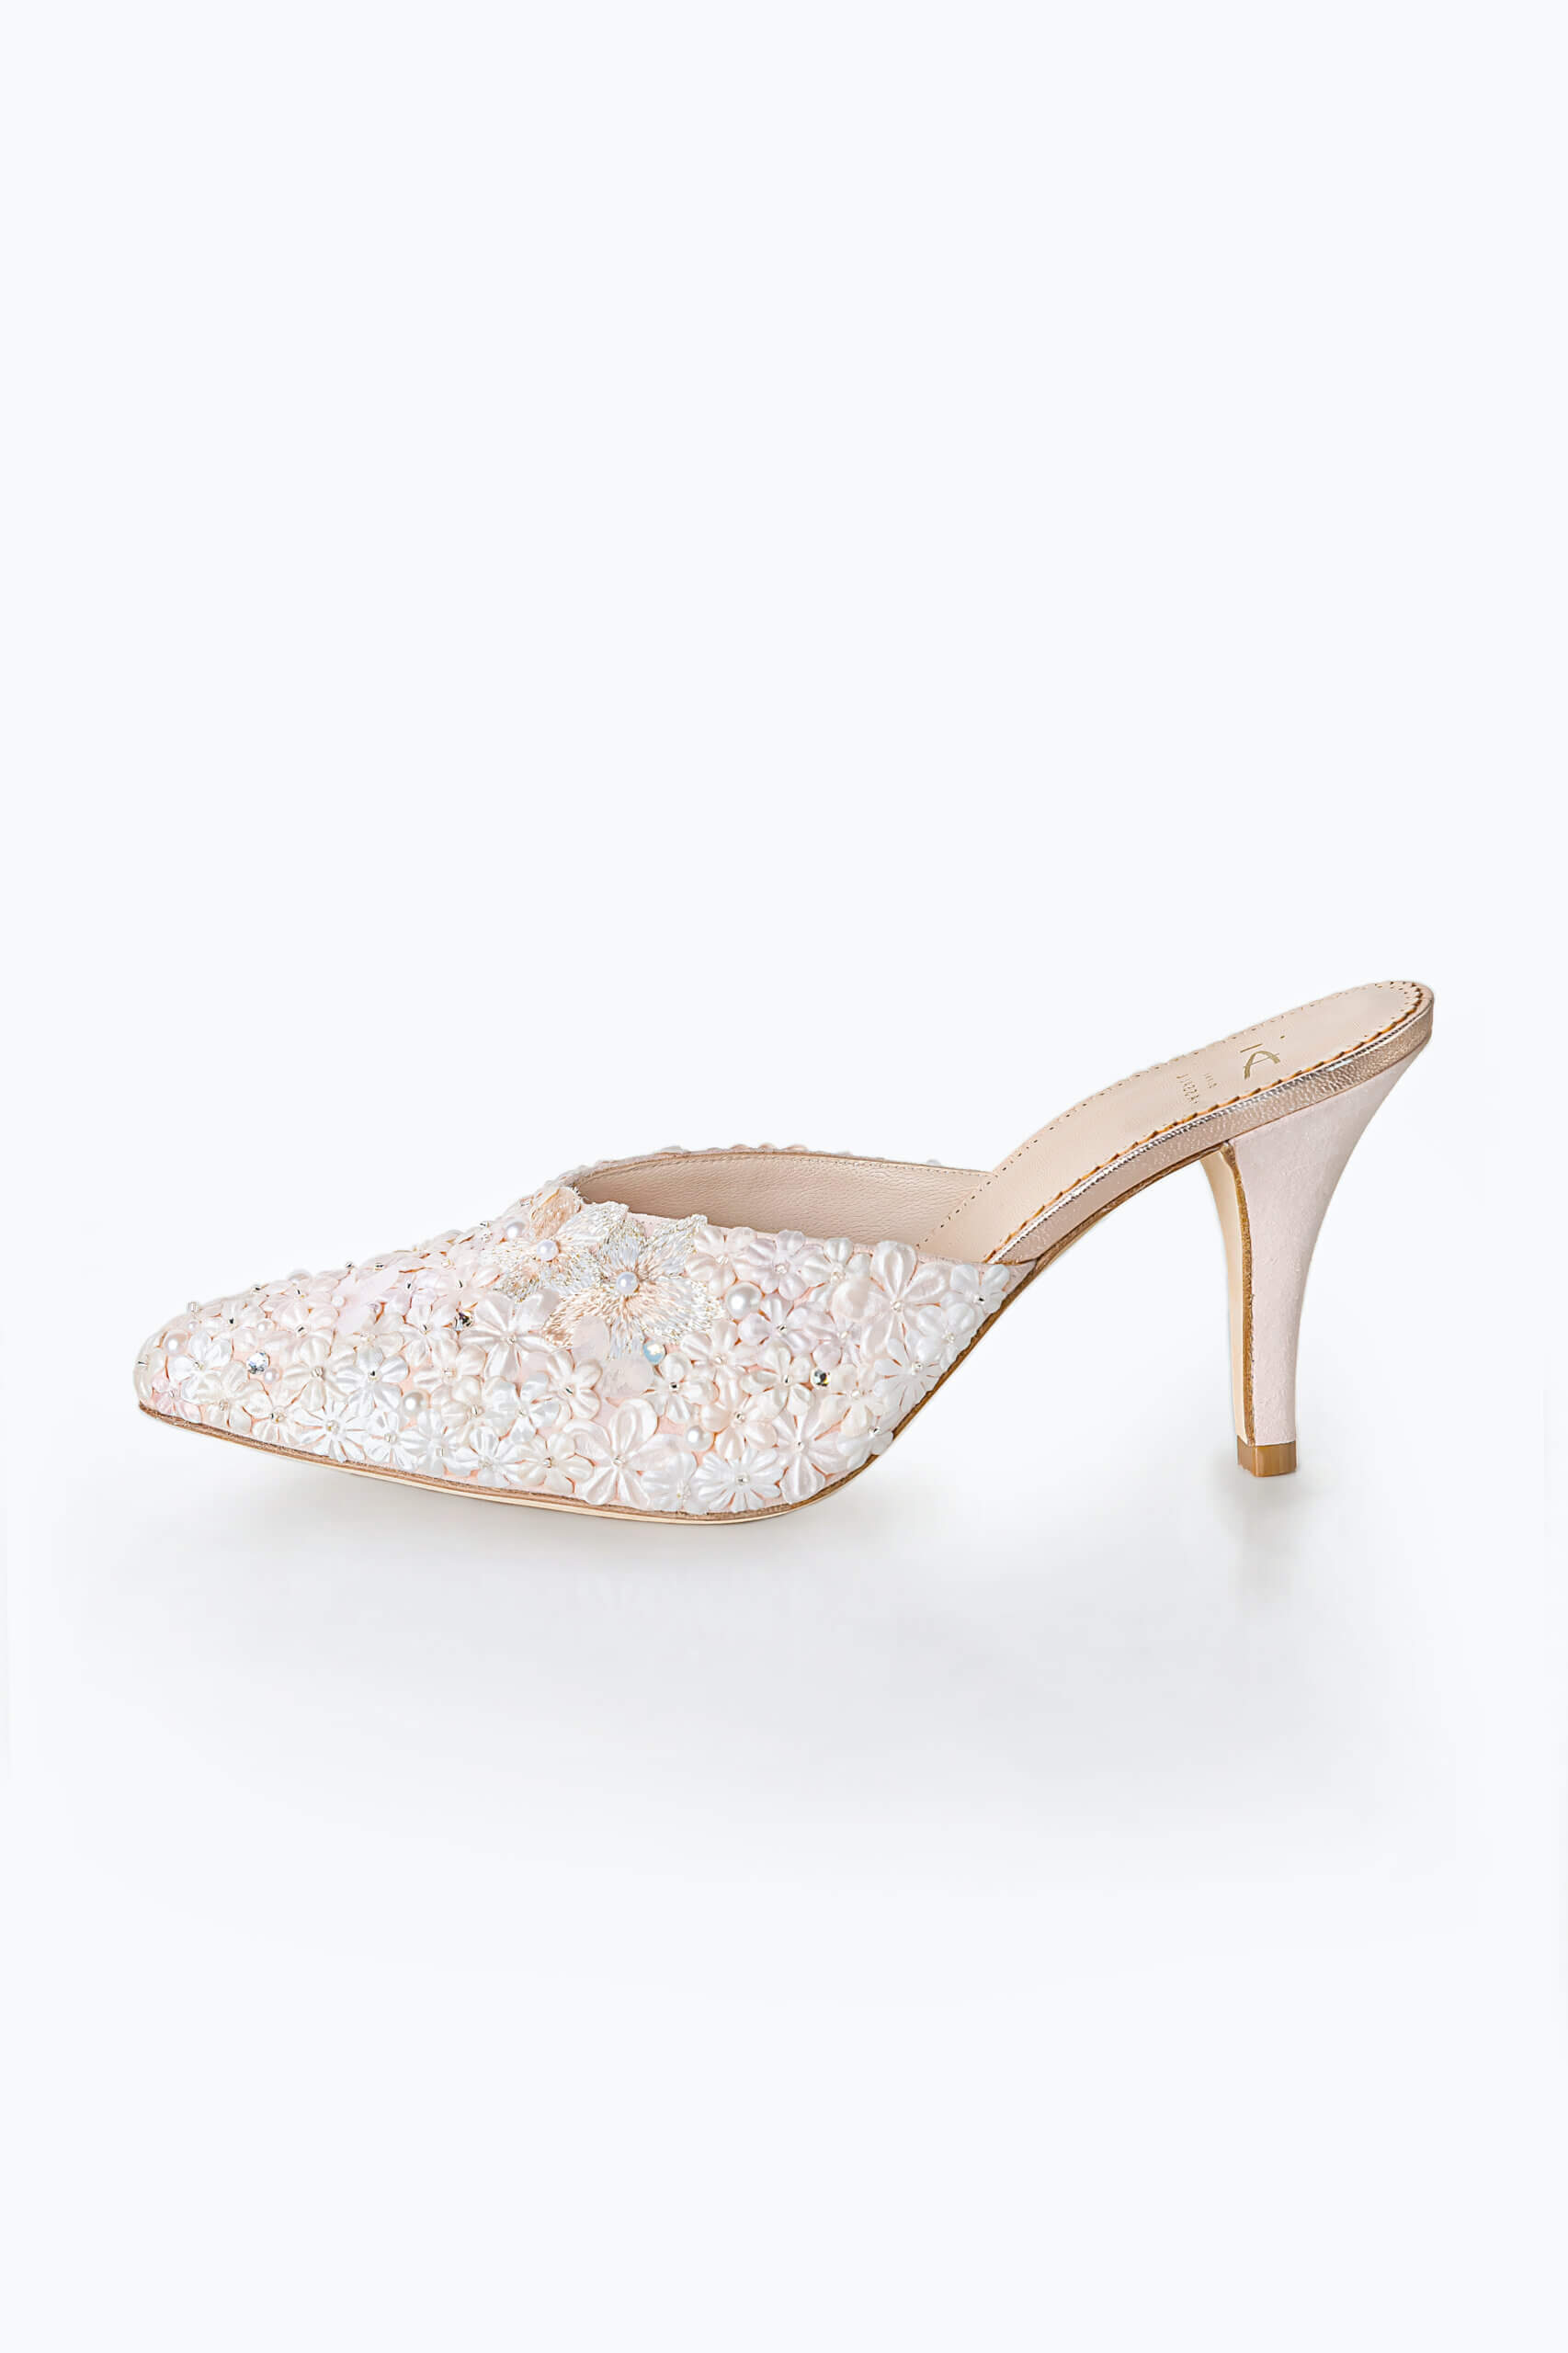 Best places to buy wedding shoes - with expert buying advice | HELLO!